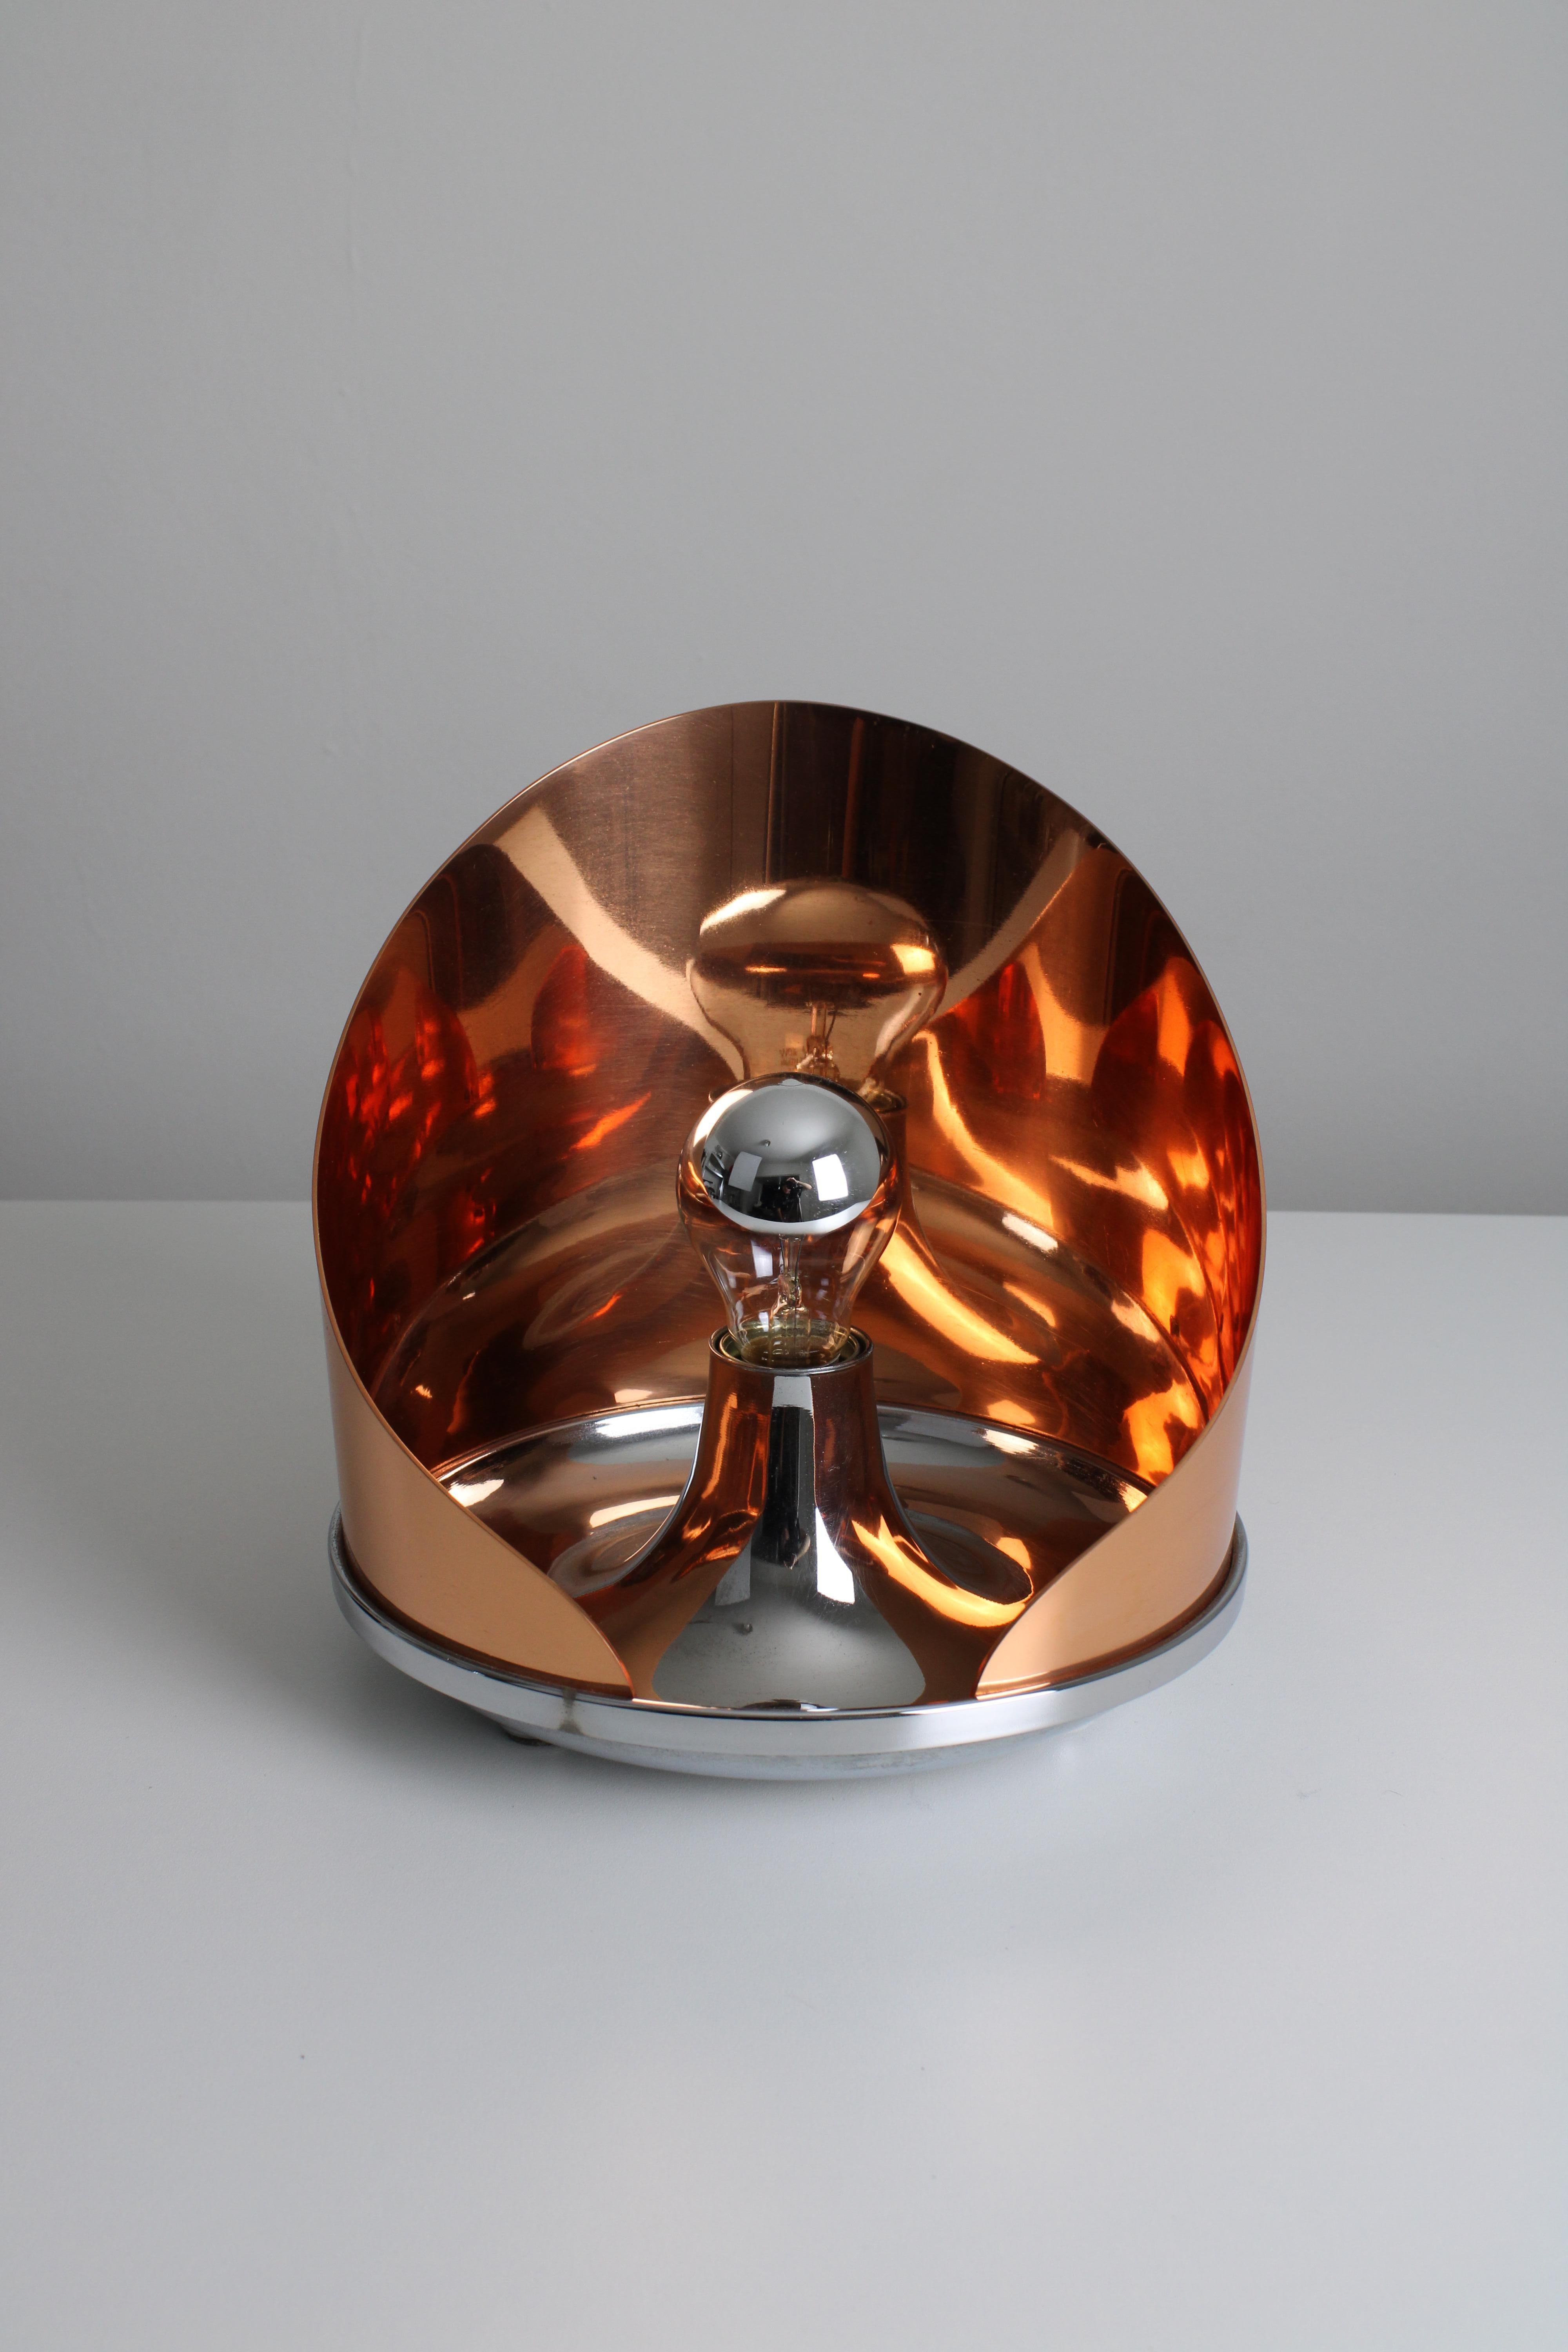 Very rare Ventola table lamp. Designed by Luigi Caccia Dominioni in 1991. Produced by Azucena in Italy circa 1990s.
A design featuring a round solid copper shade that creates a warm and diffused light. Fully made of high quality materials such as